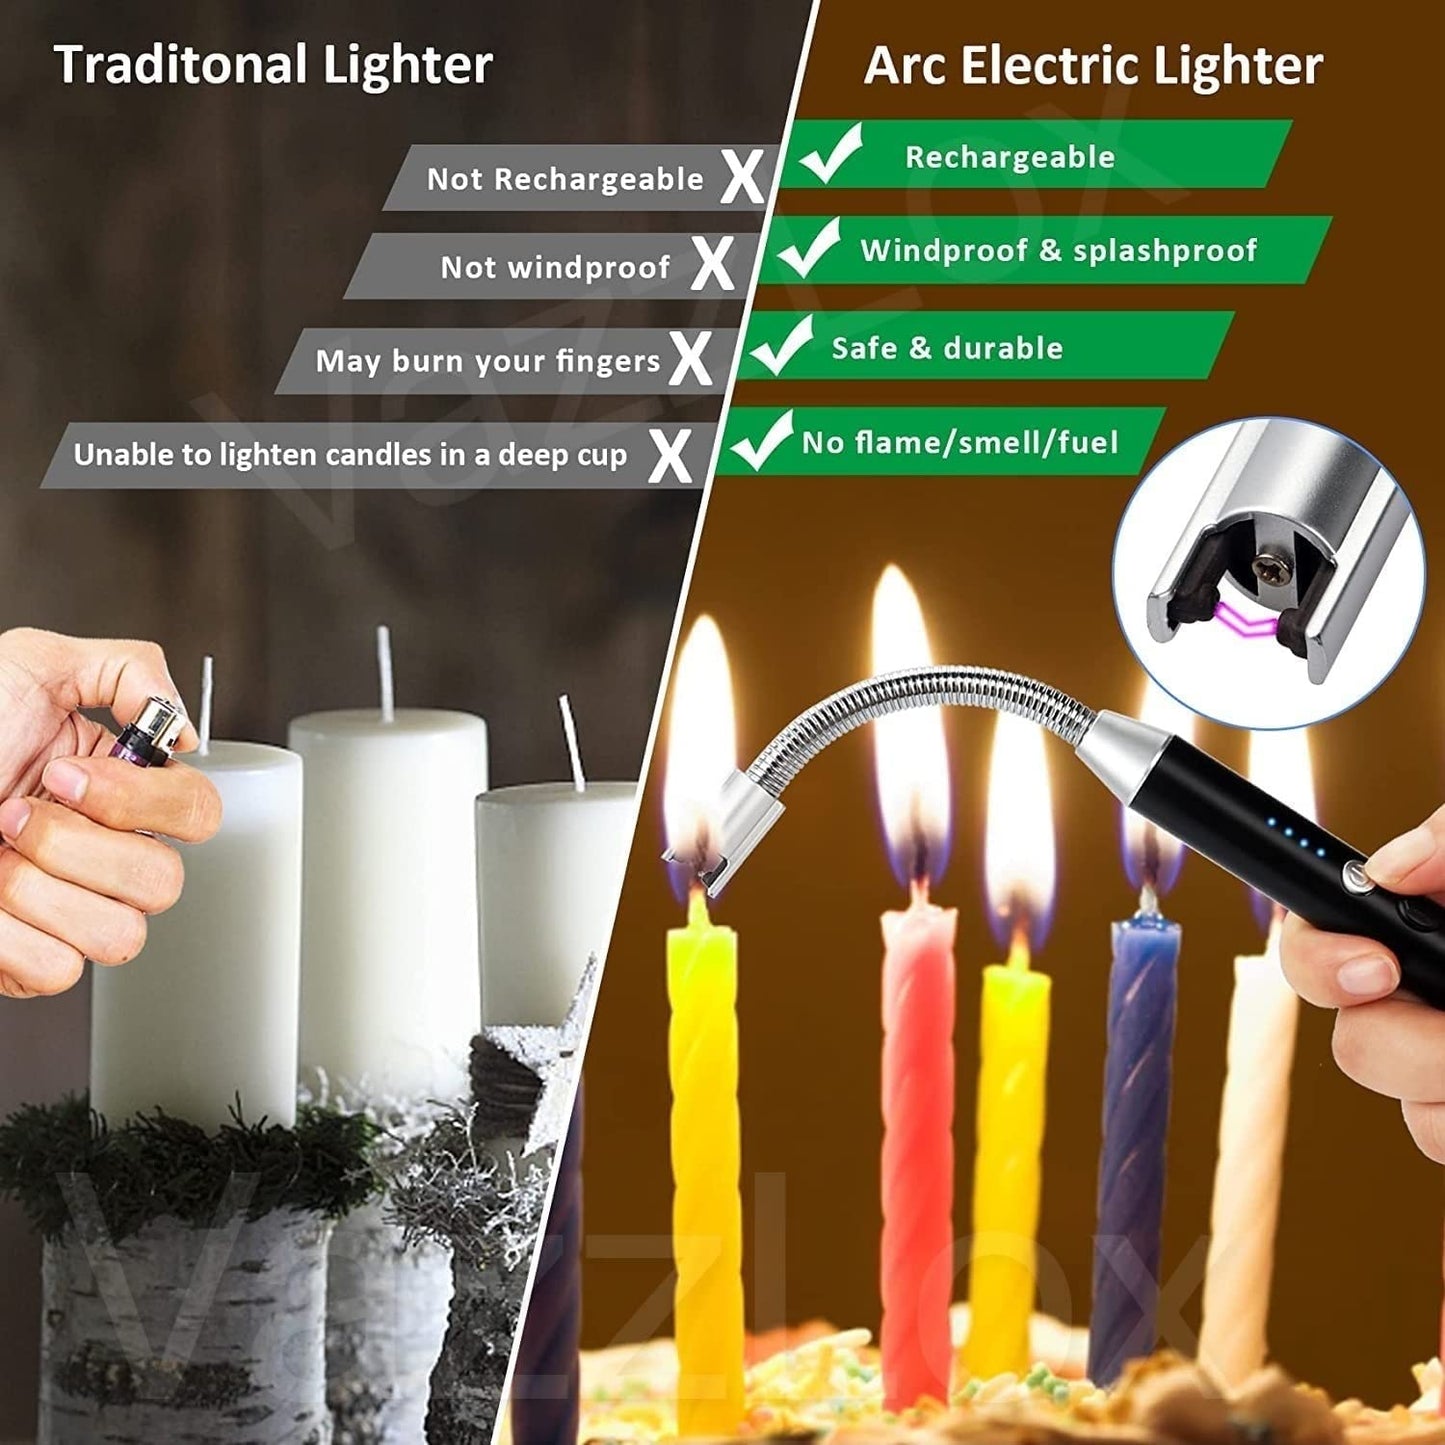 Candle Lighter Rechargeable, Electric Arc Lighter Ignition Lighter with USB Cable, Windproof Flameless Electronic Lighters for Kitchen, Barbecue, Candles, Gas Stove